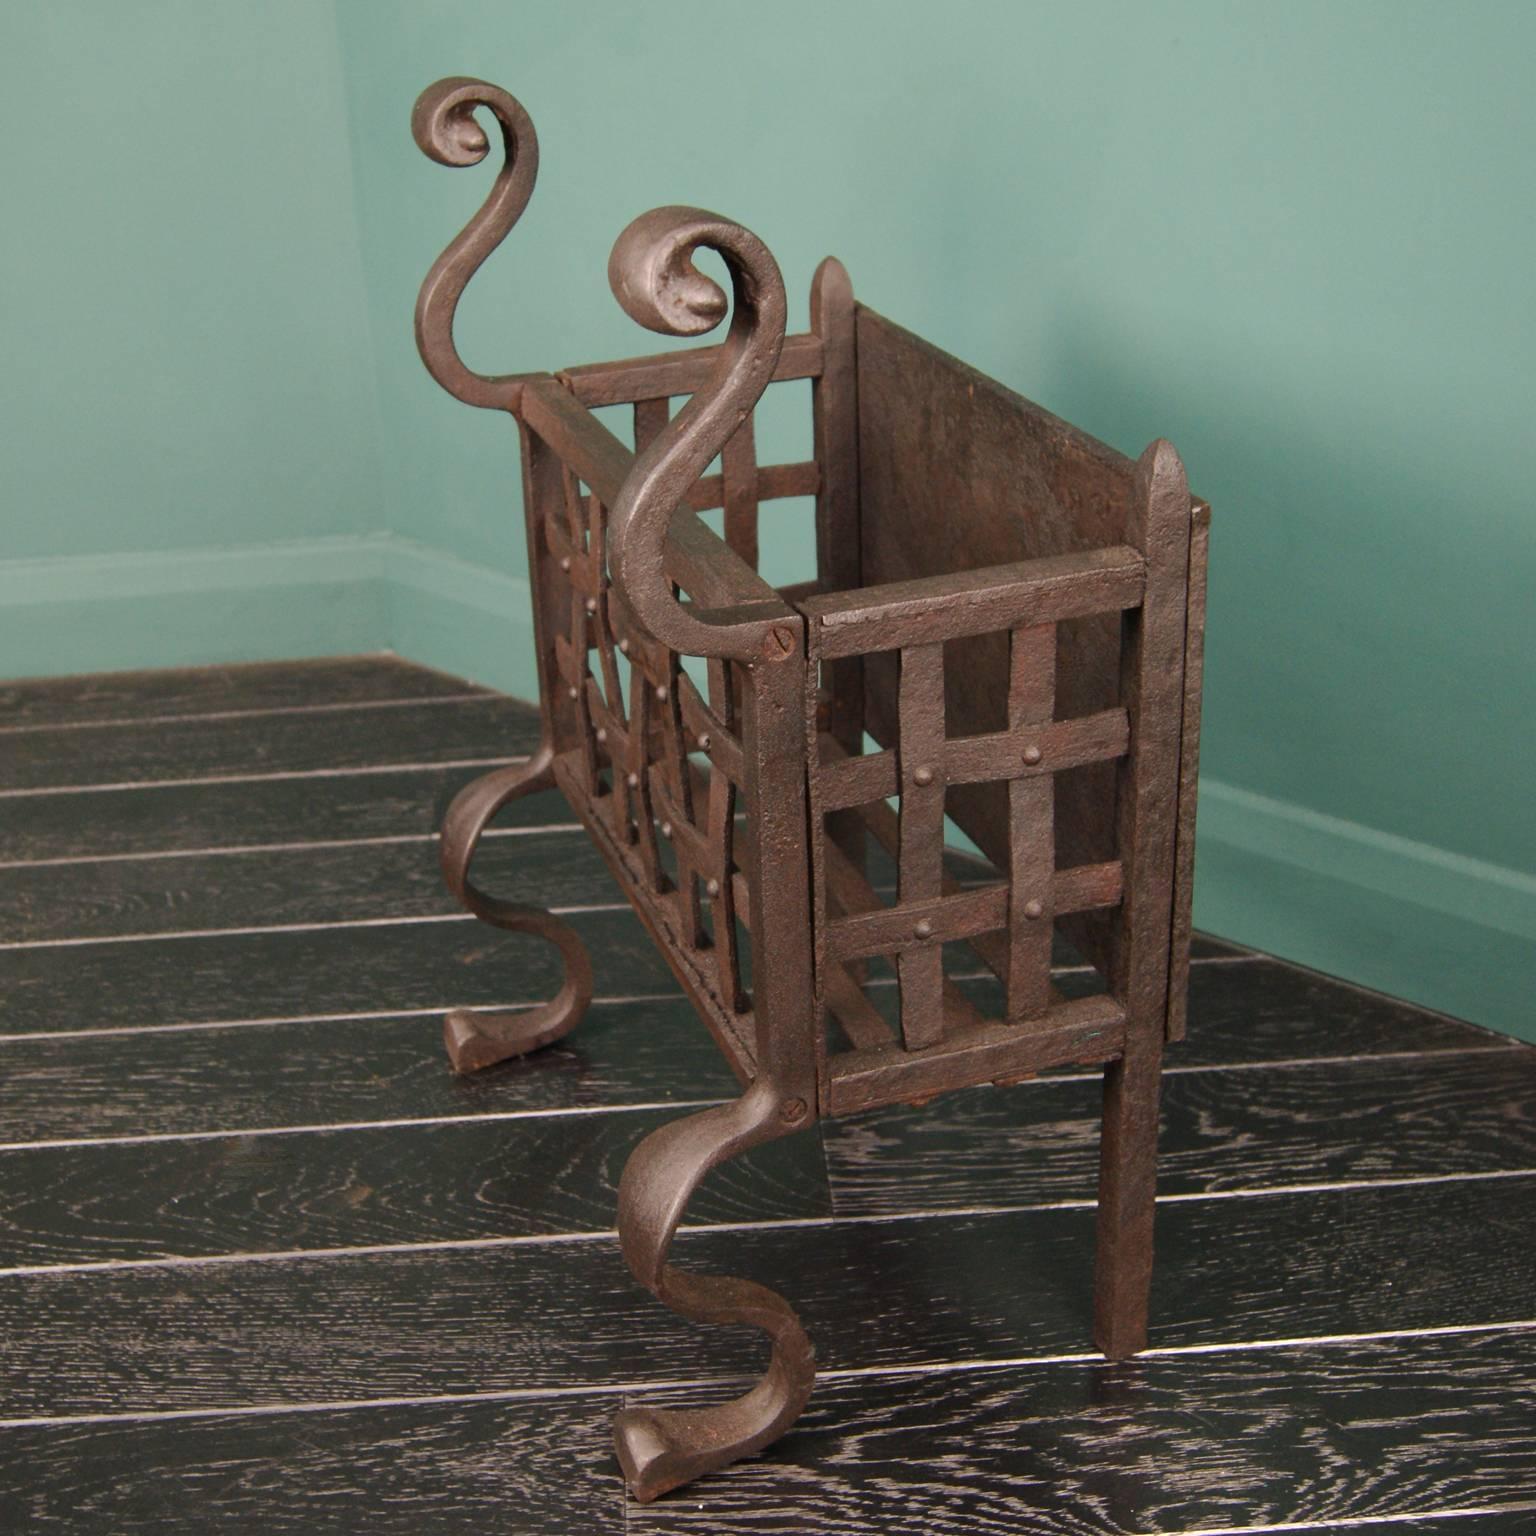 A small elegant wrought and cast iron fire basket, with rivet-work detail, scroll finials and shaped legs.